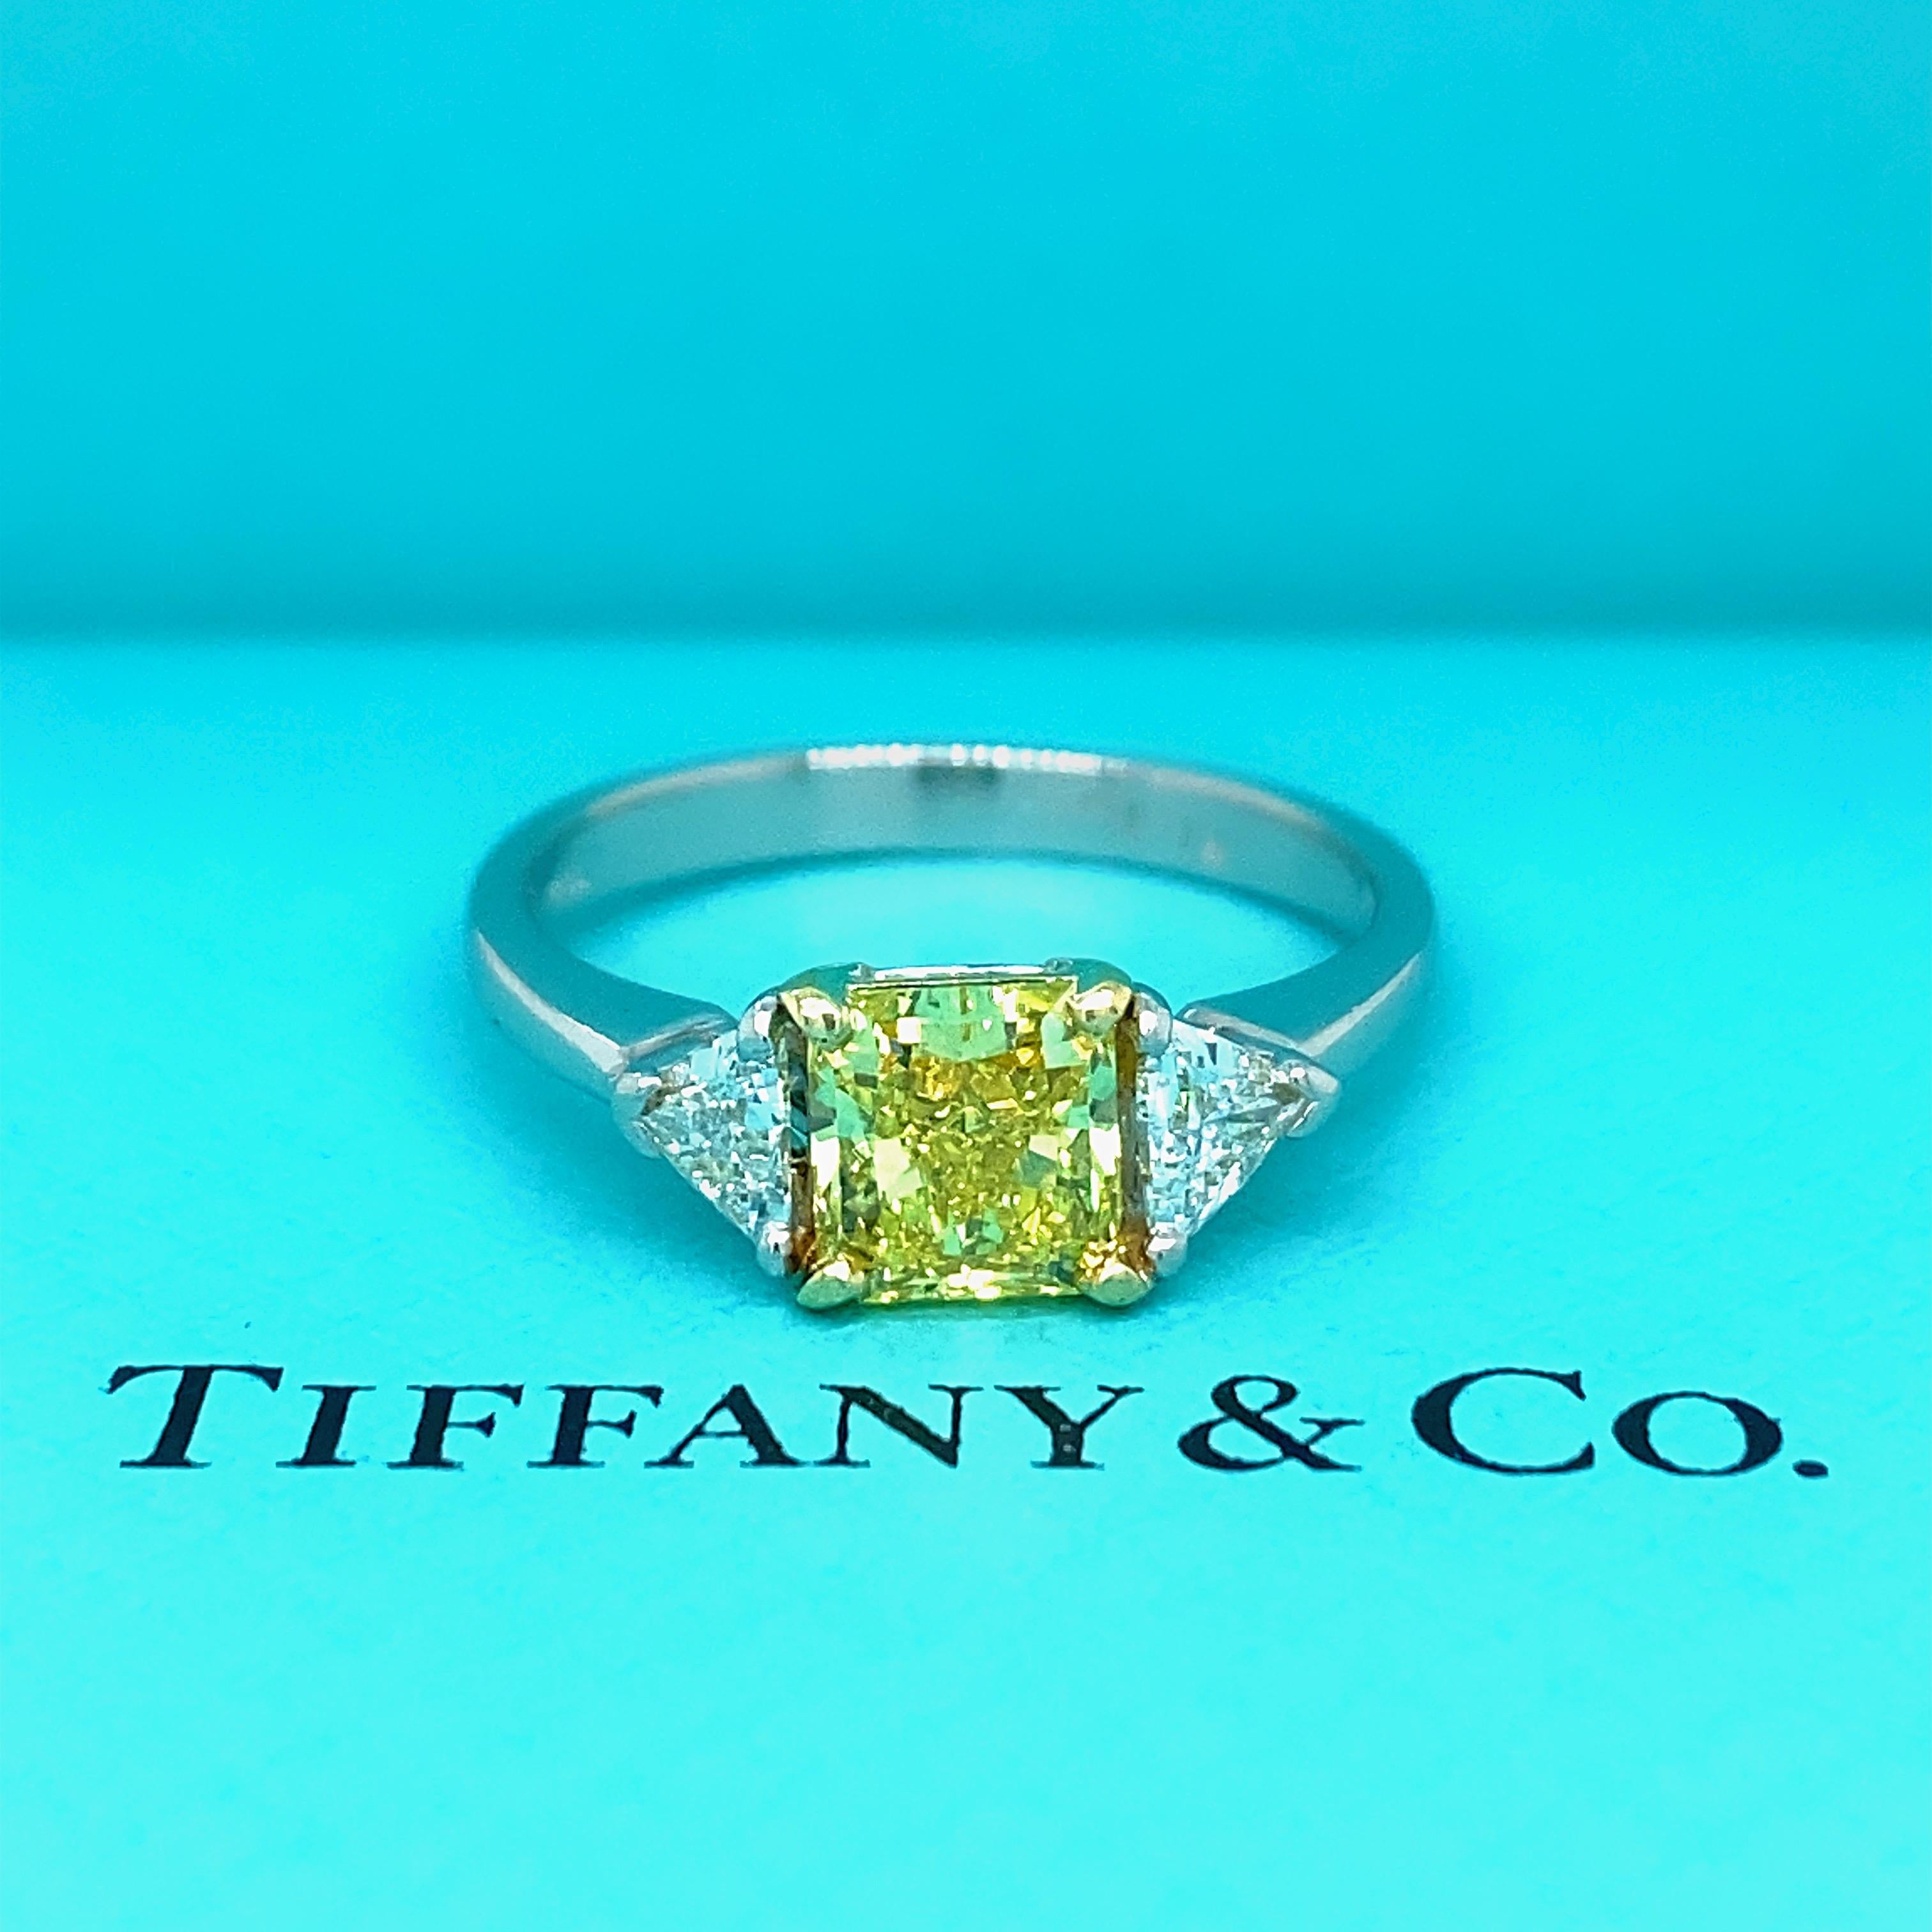 TIFFANY & CO. Fancy Vivid Yellow Radiant Diamond Three-Stone Engagement Ring

** This Beautiful and Unique Design has been retired and is no longer available *** 
Style:  Three-Stone
Ref. number:  T&C #D16603 - GIA Diamond Report #8585642
Metal: 